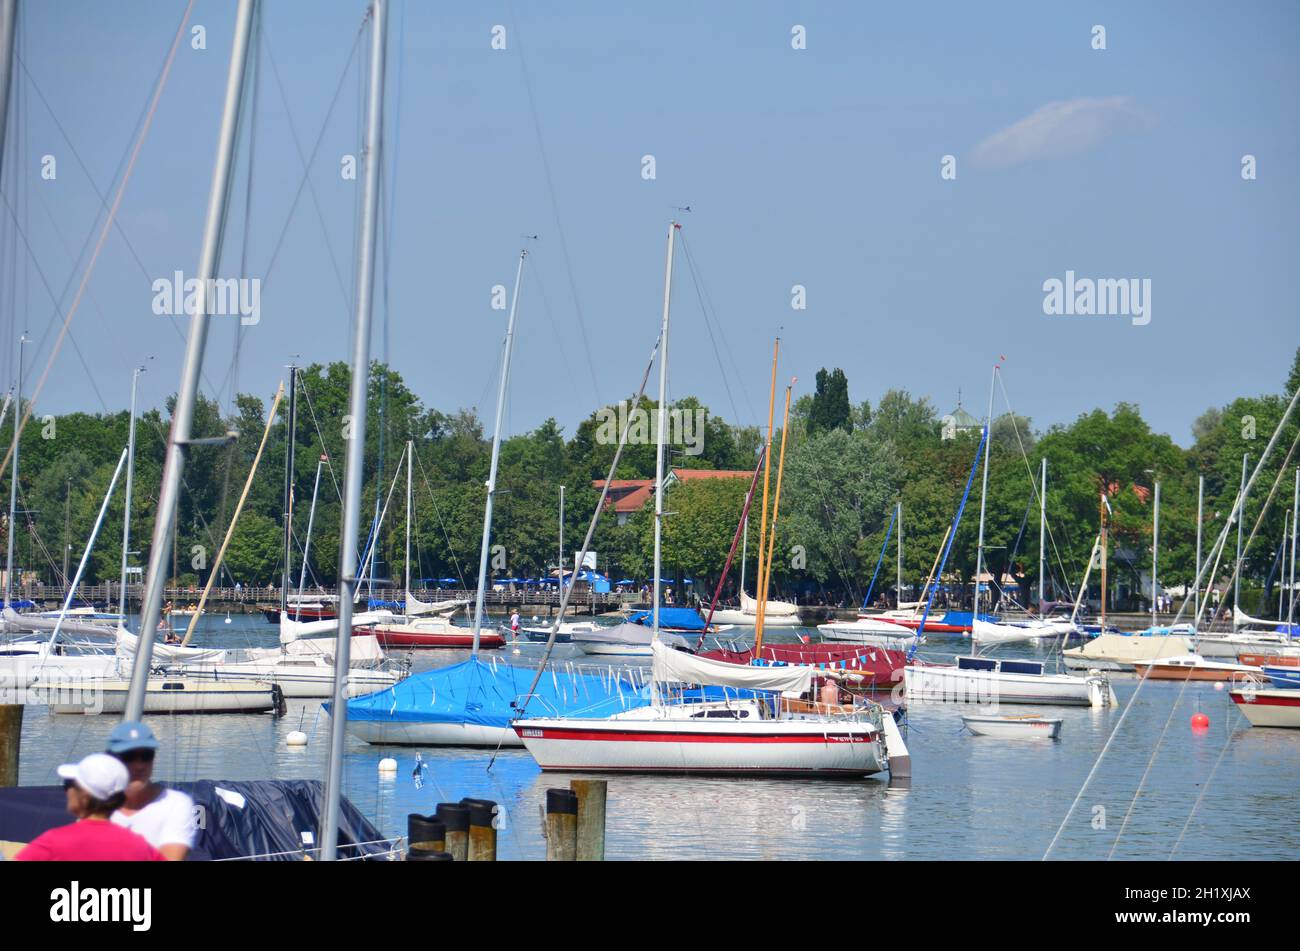 Ammersee in Baviera, Germania, Europa - Ammersee in Baviera, Germania, Europa Foto Stock